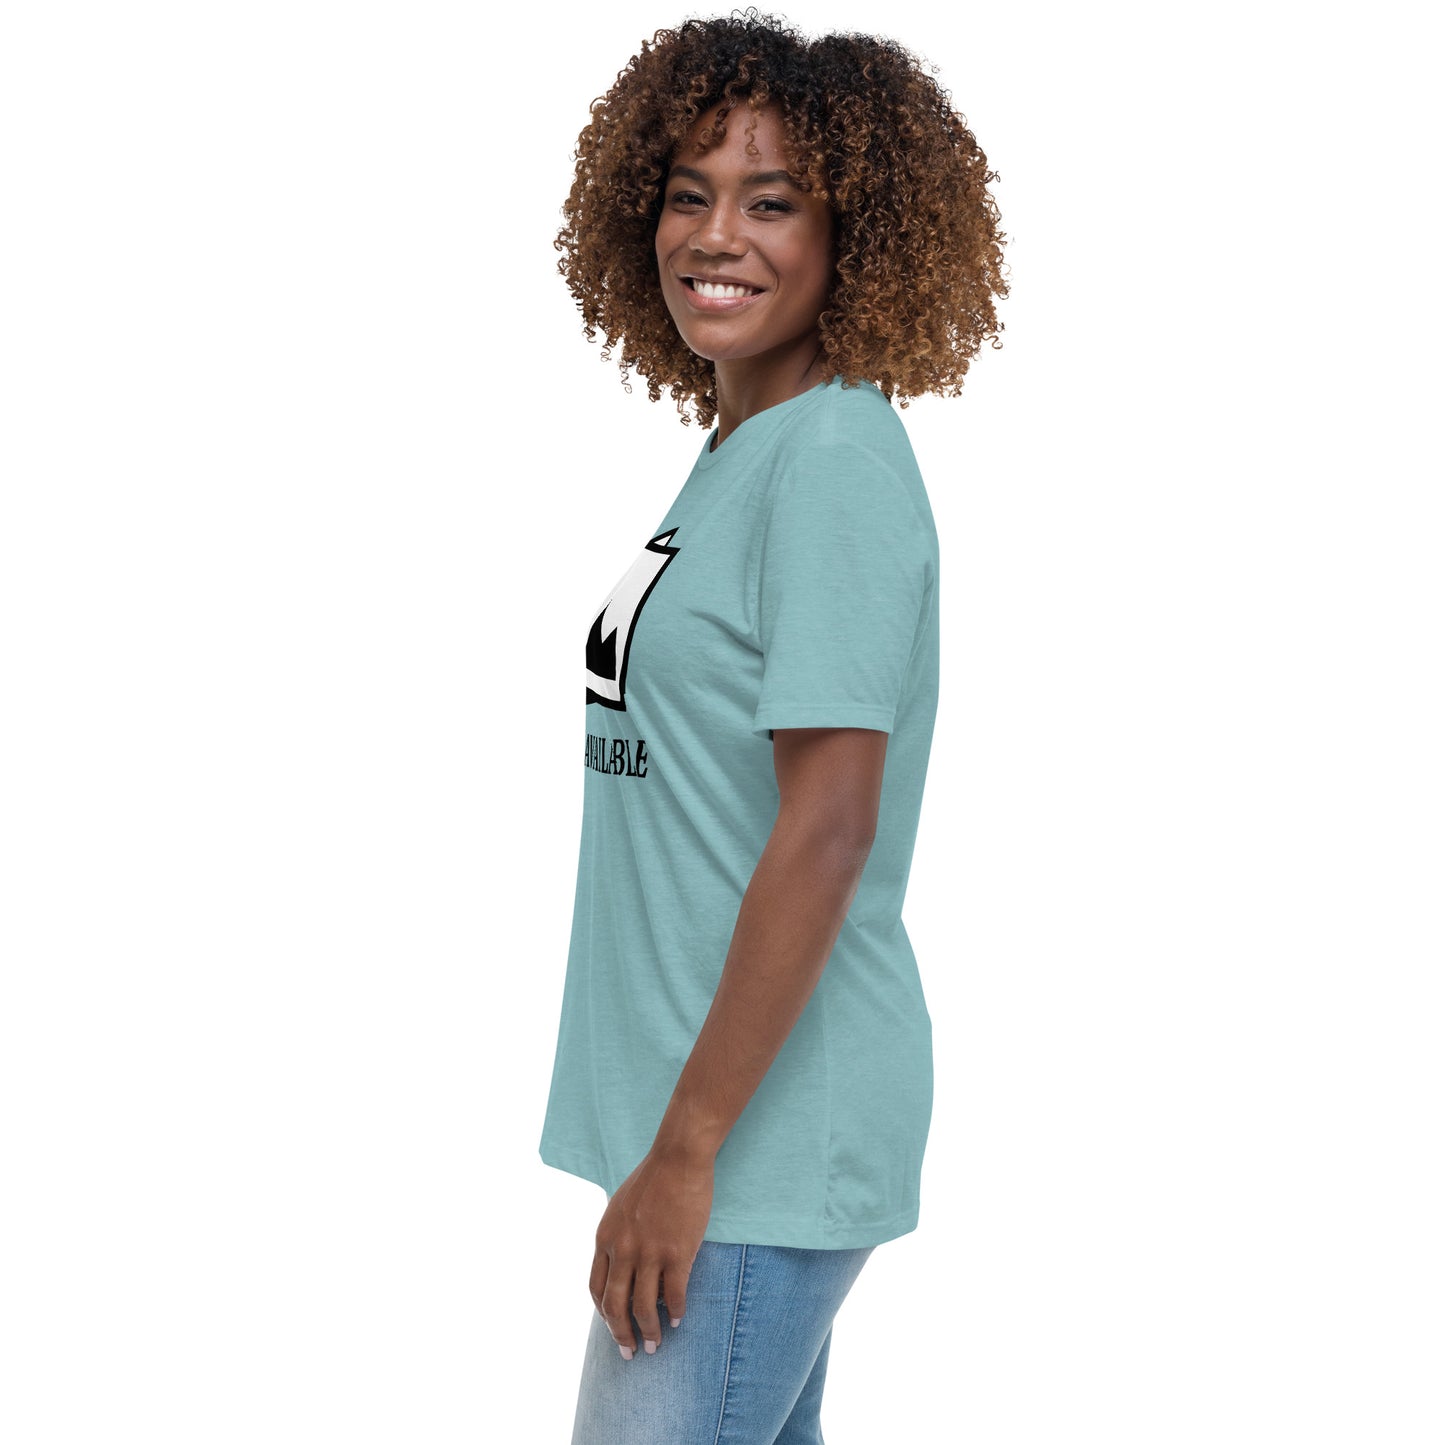 Women with blue lagoon t-shirt with image and text "no image available"